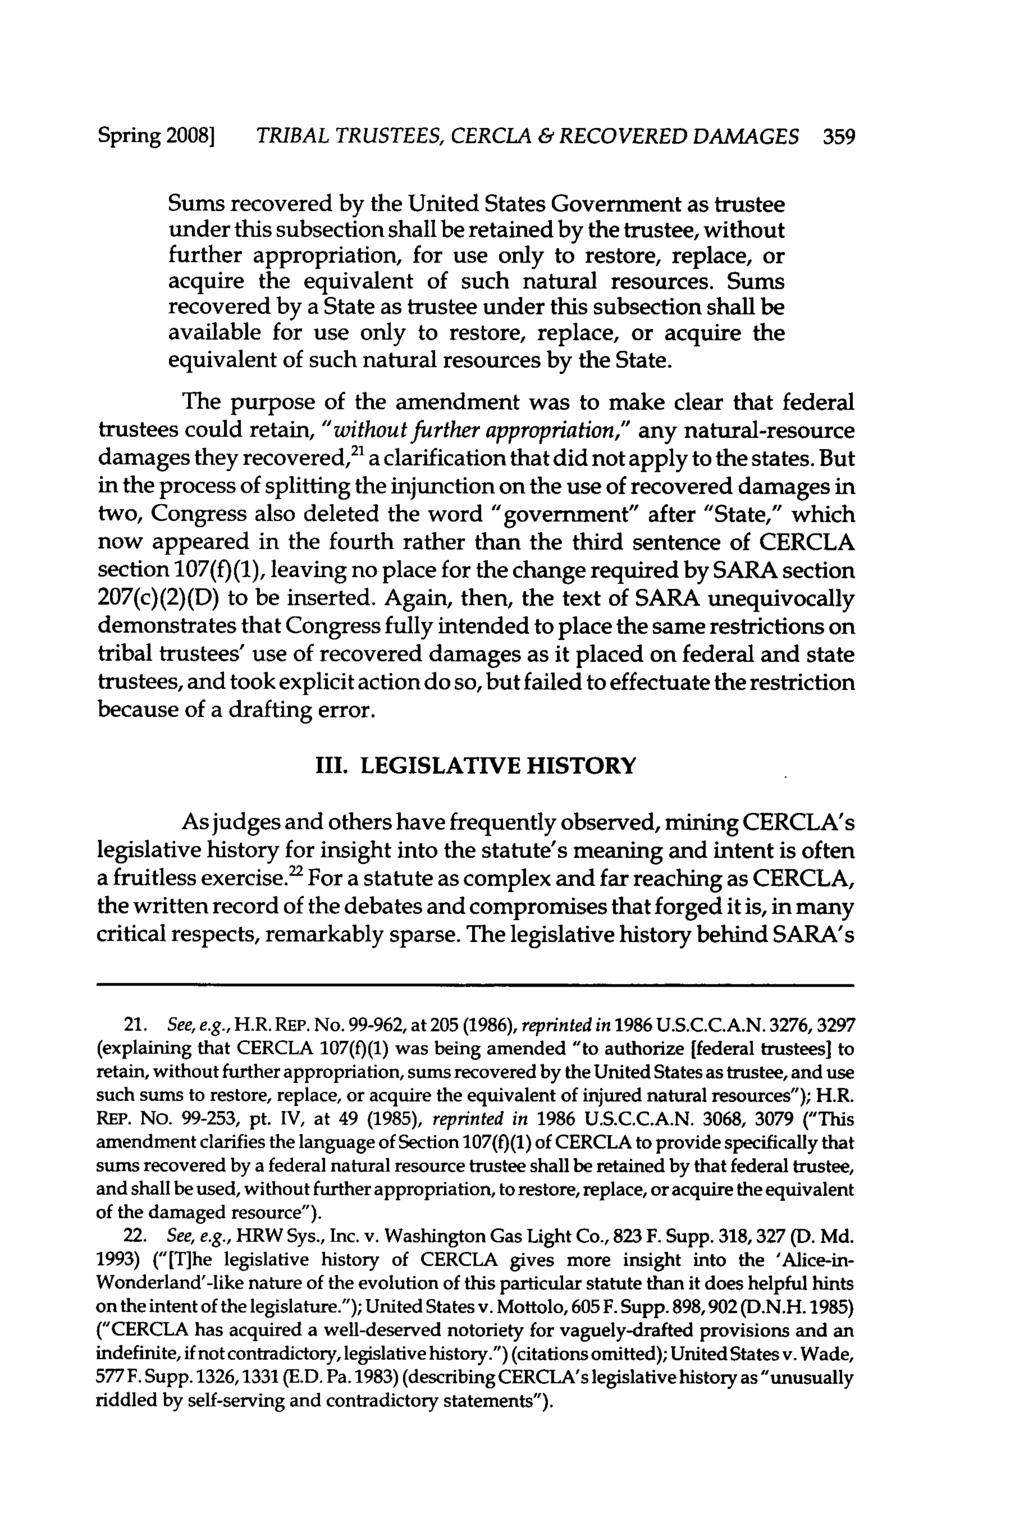 Spring 2008] TRIBAL TRUSTEES, CERCLA & RECOVERED DAMAGES 359 Sums recovered by the United States Government as trustee under this subsection shall be retained by the trustee, without further